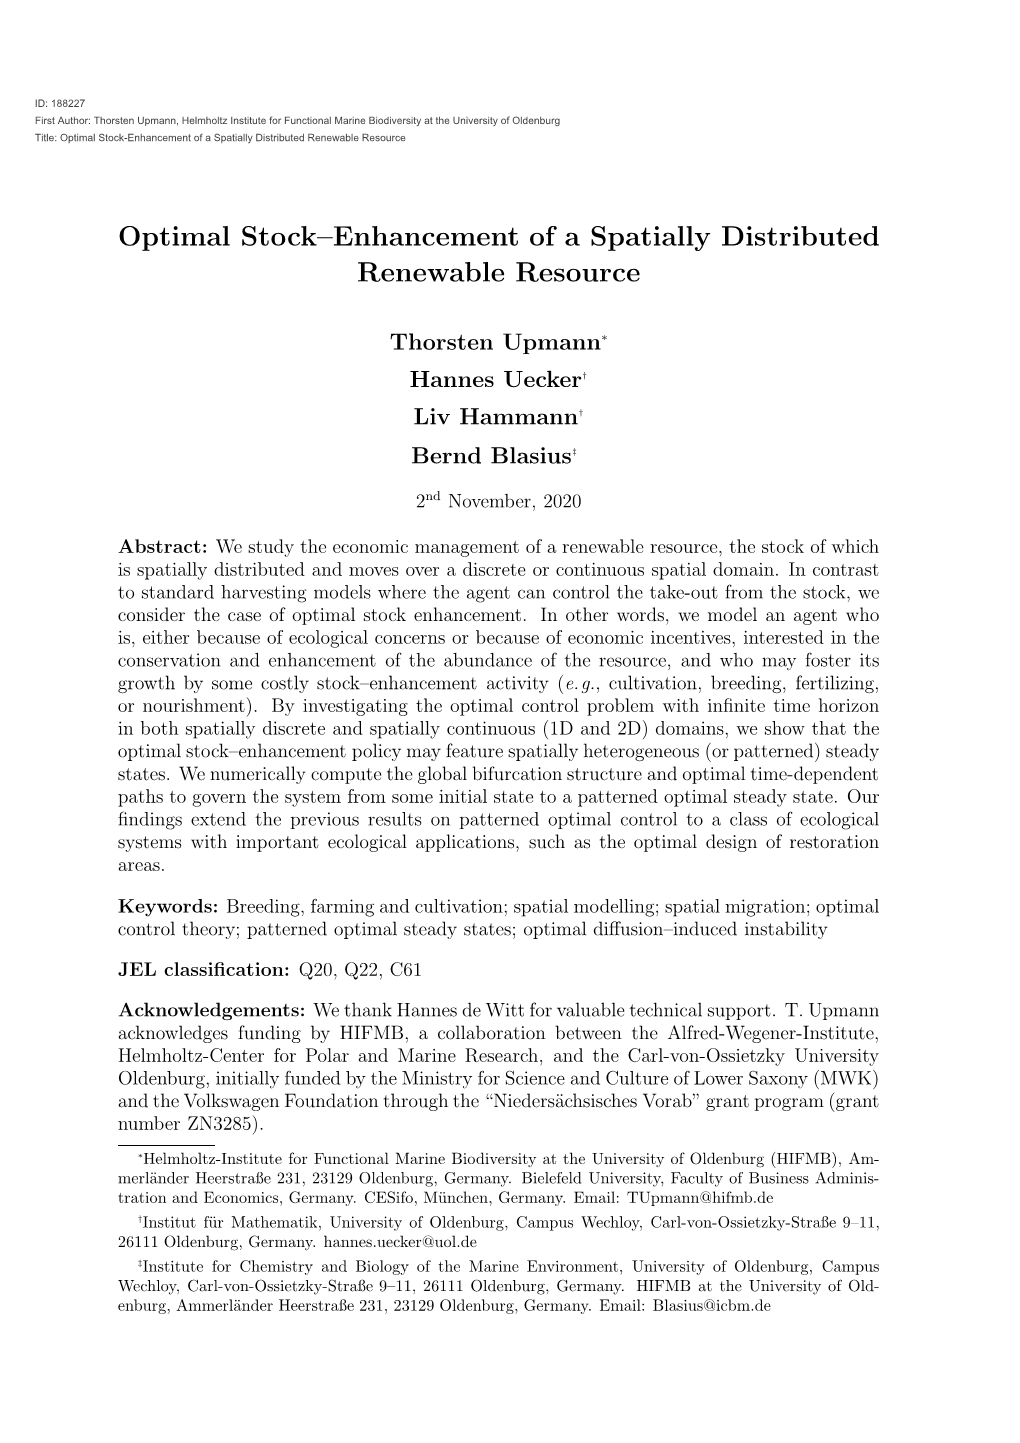 Optimal Stock–Enhancement of a Spatially Distributed Renewable Resource